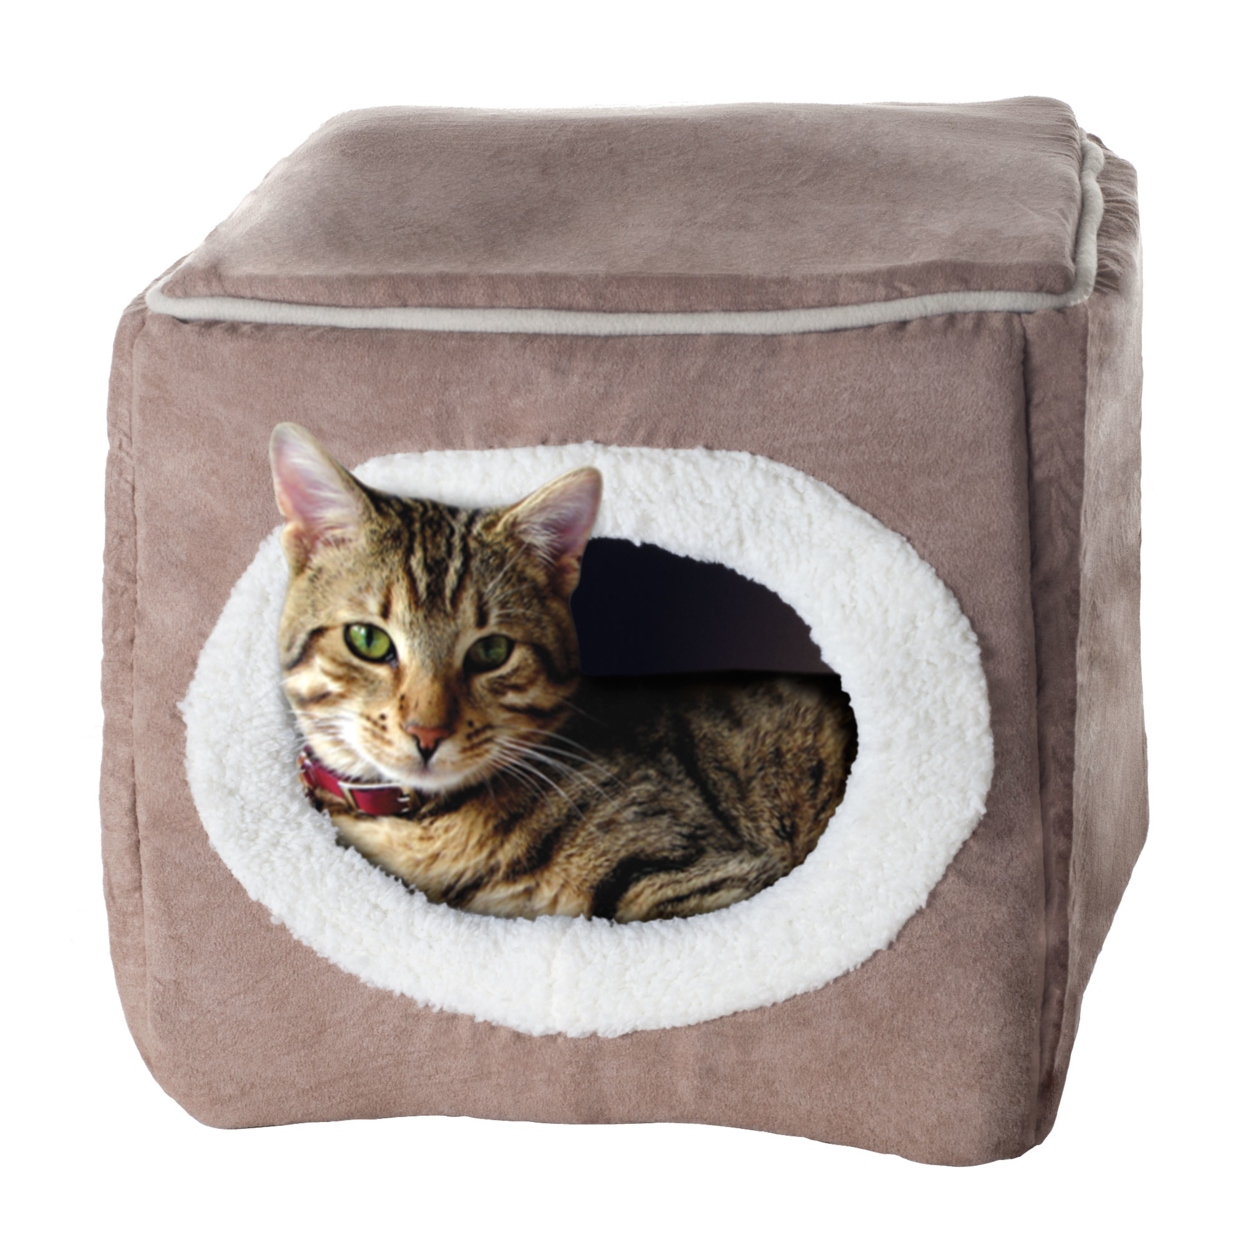 Tan Cat Pet Bed Cozy Cave Cube 13 X 12 Inches Removable Insert Pillow Cat Feels Safe And Can Hide